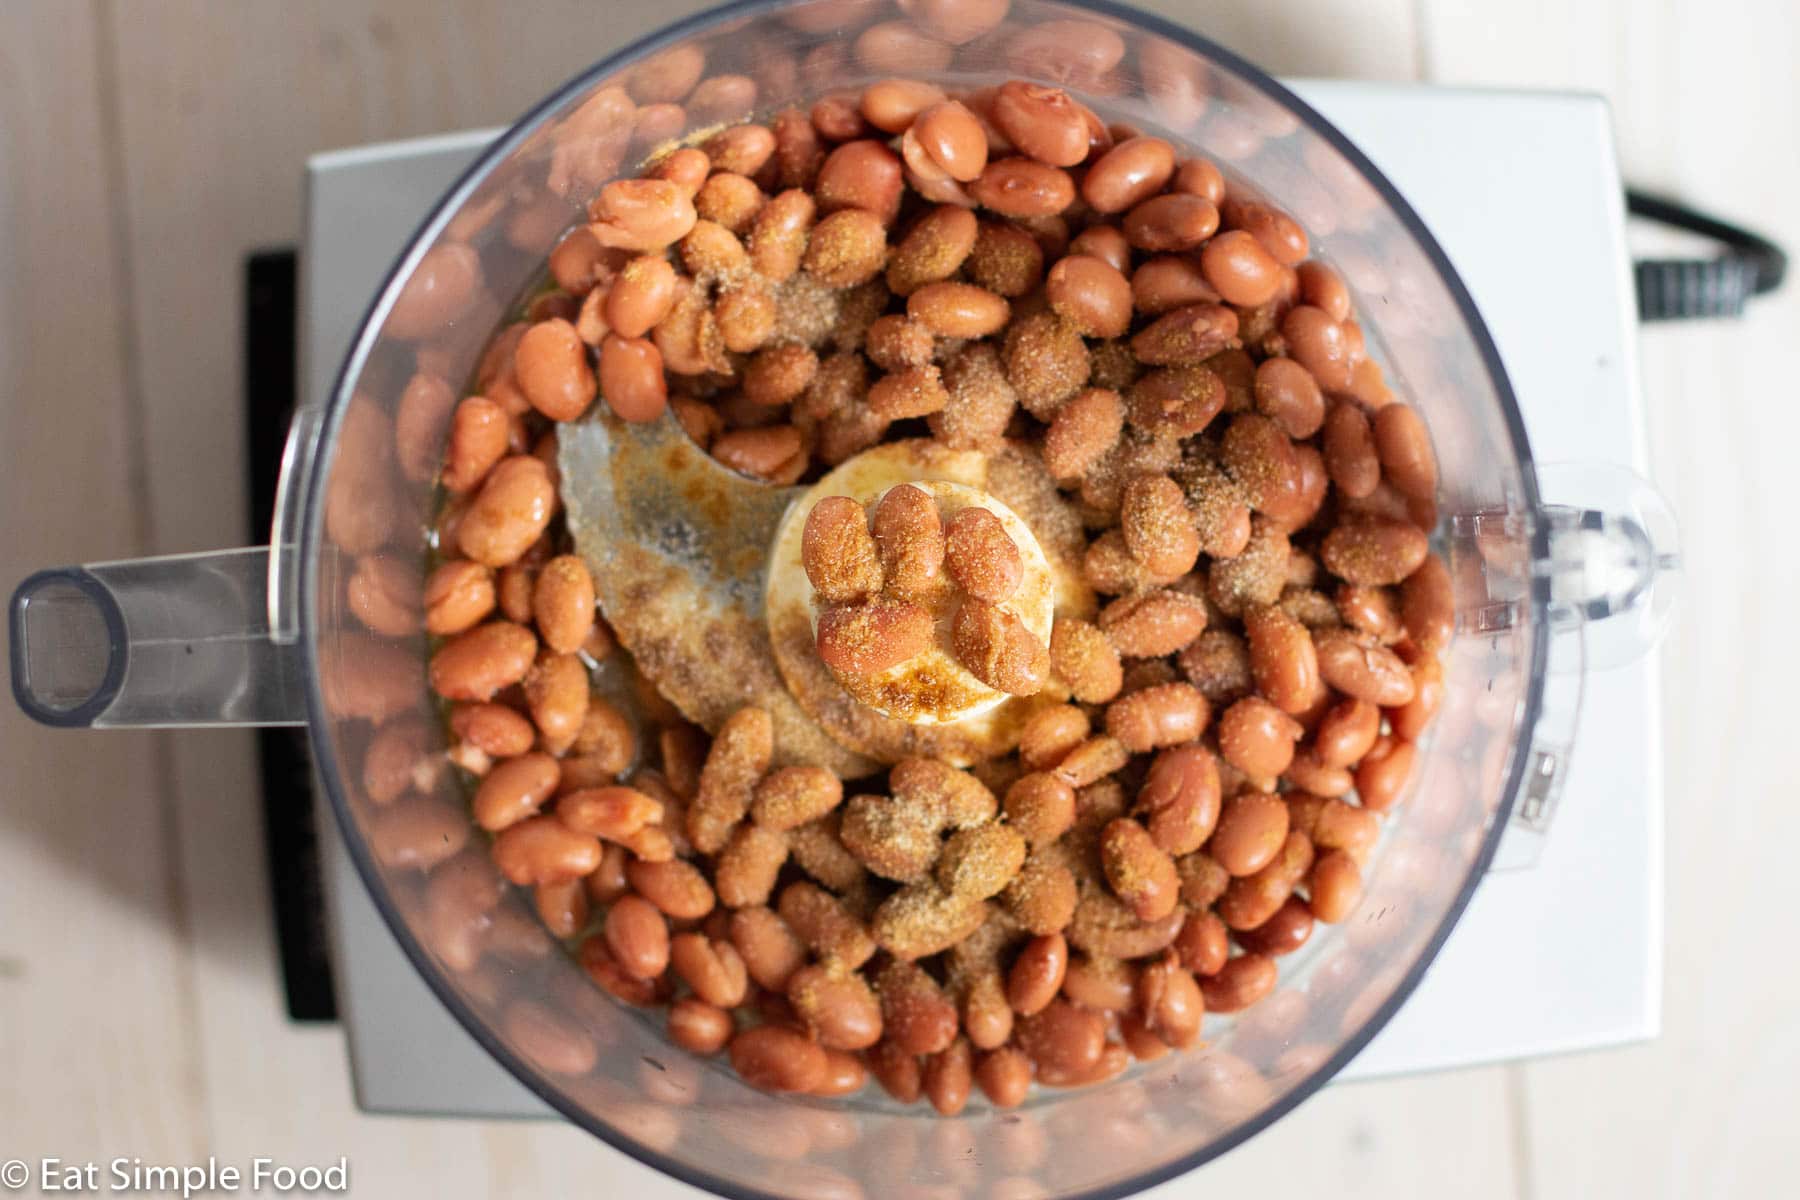 Top view of food processor filled with drained pinto beans and spices.